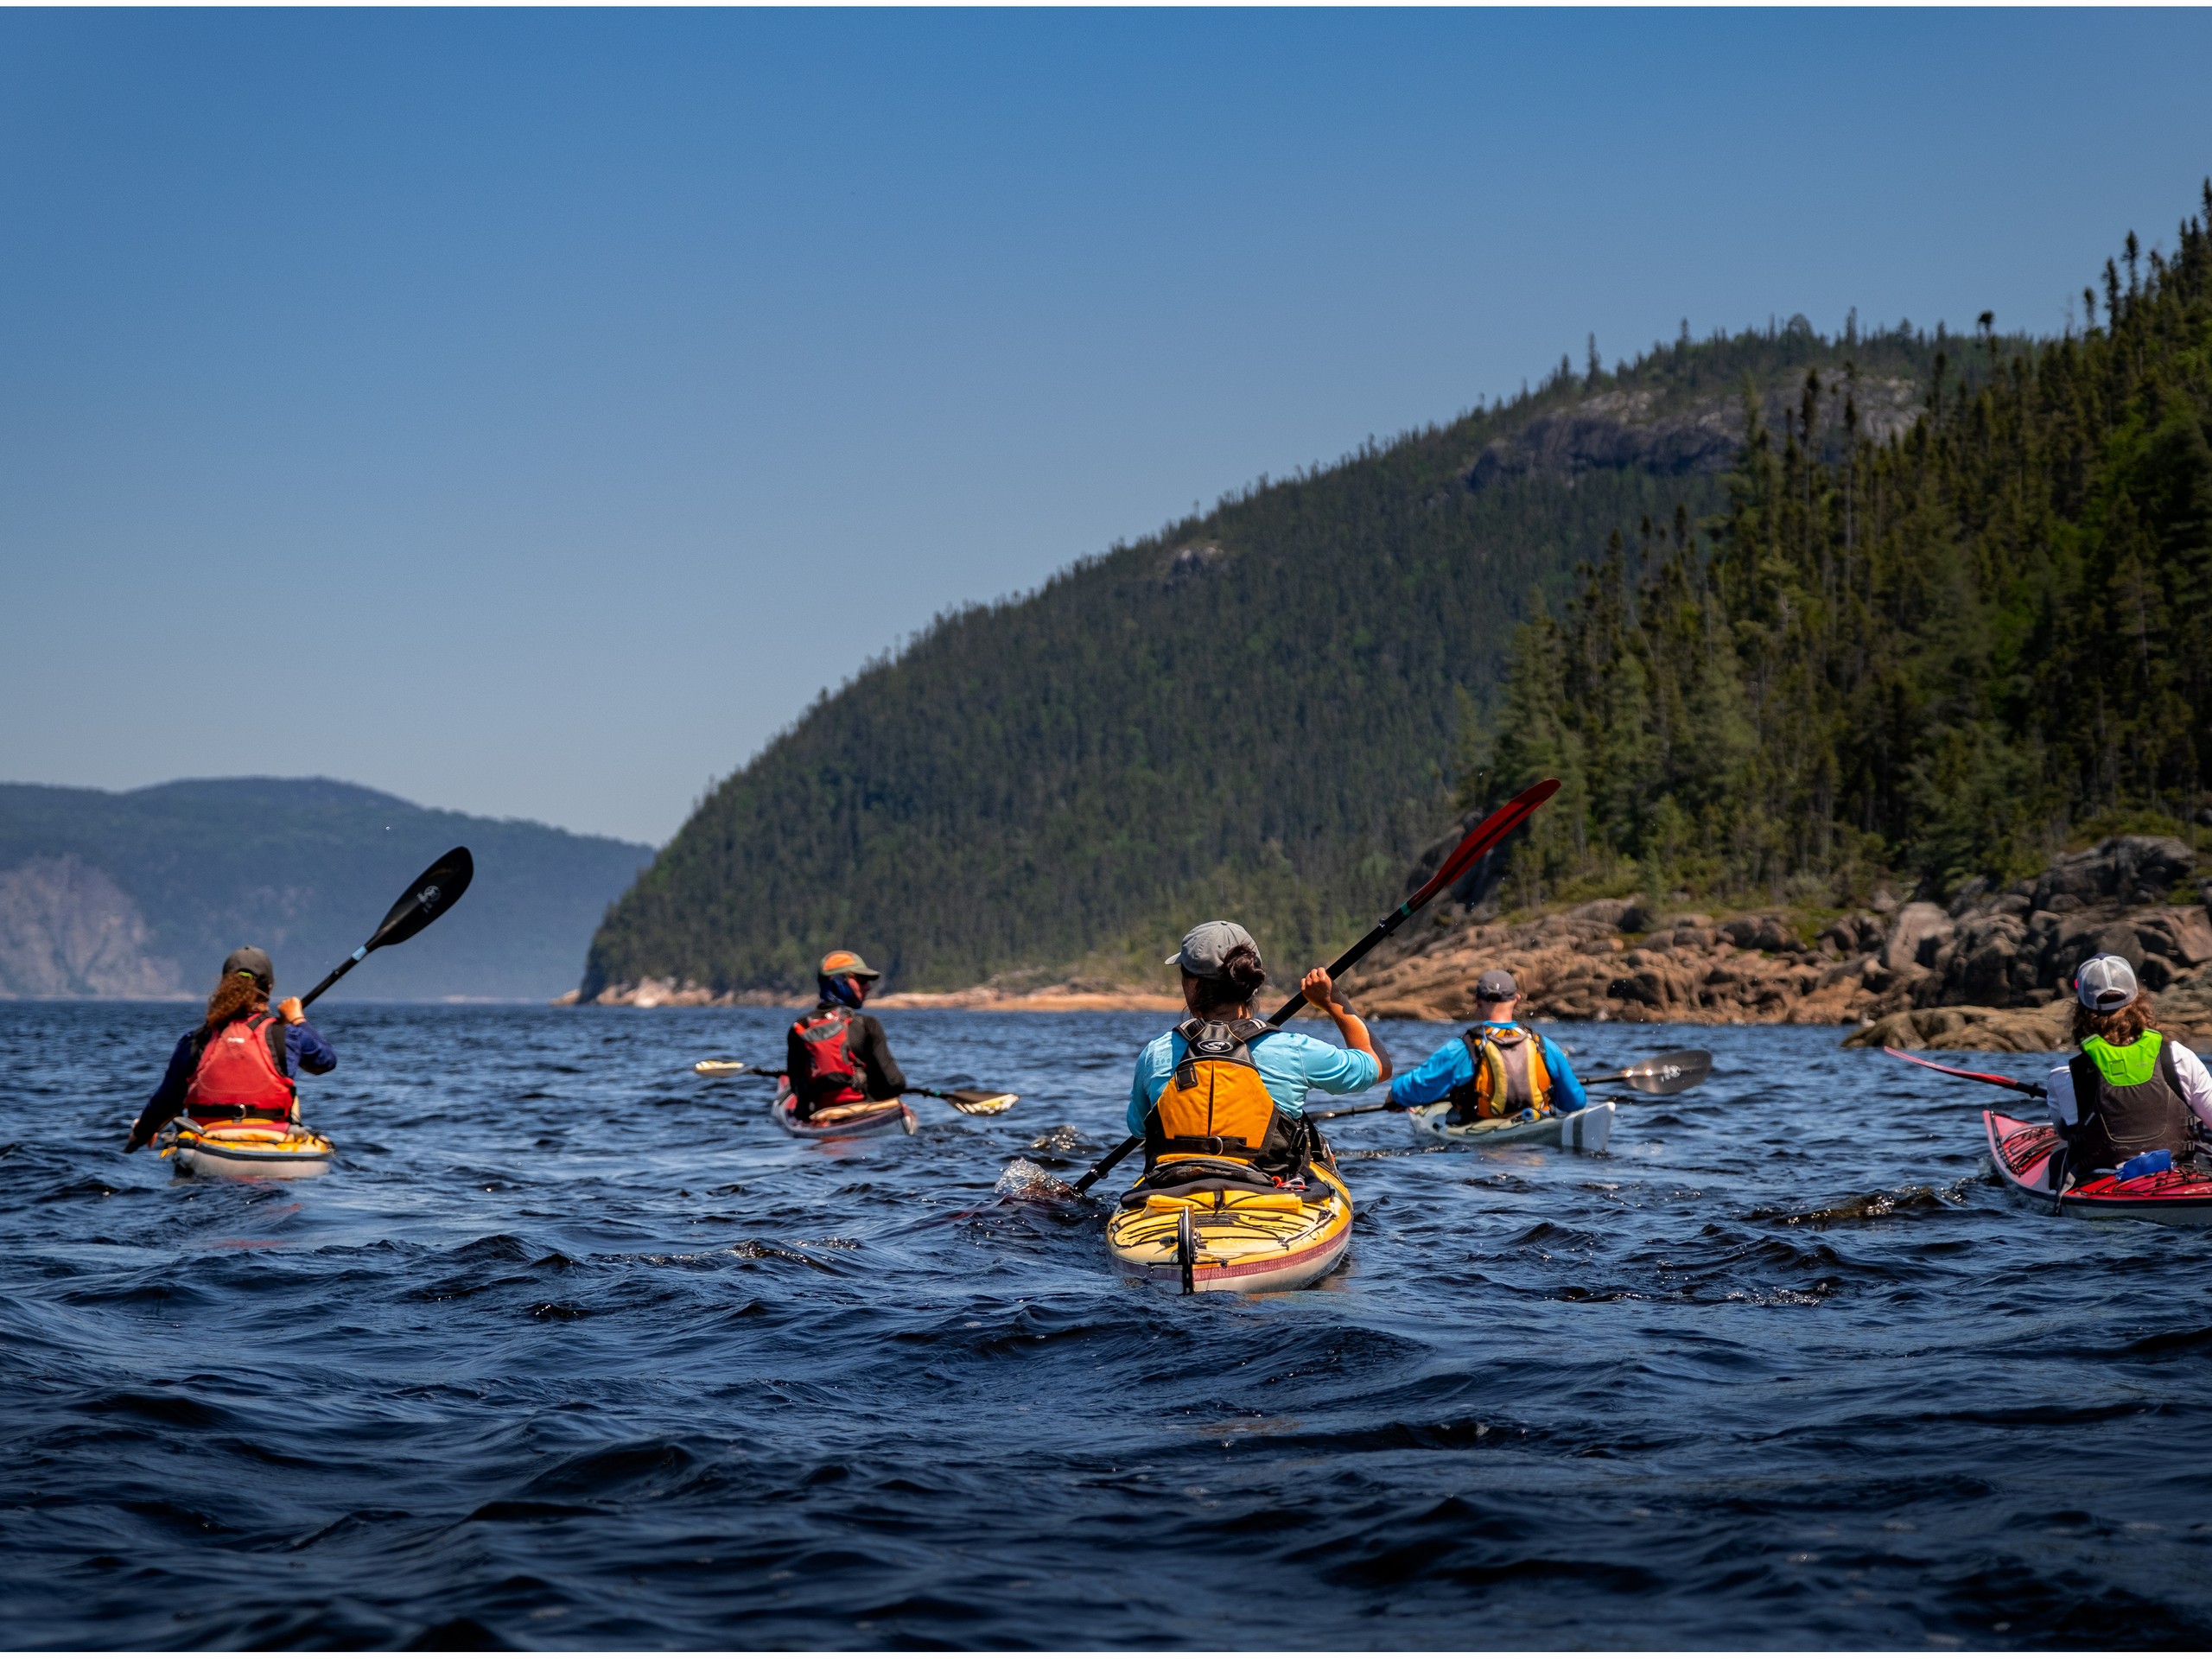 Group kayaking in open waters of Quebec